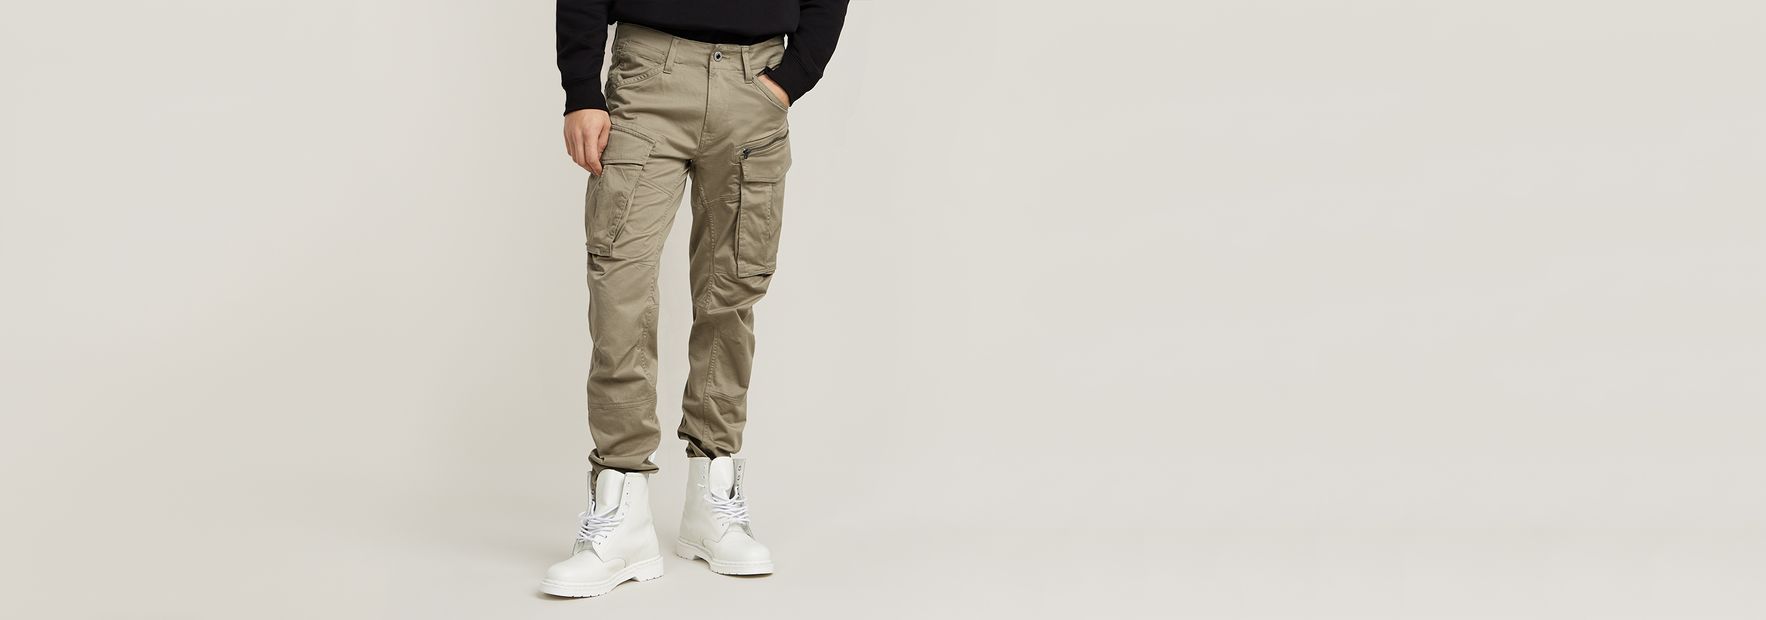 Buy G-STAR RAW Beige Bronson Slim Chino Trousers - Trousers for Men 1276629  | Myntra